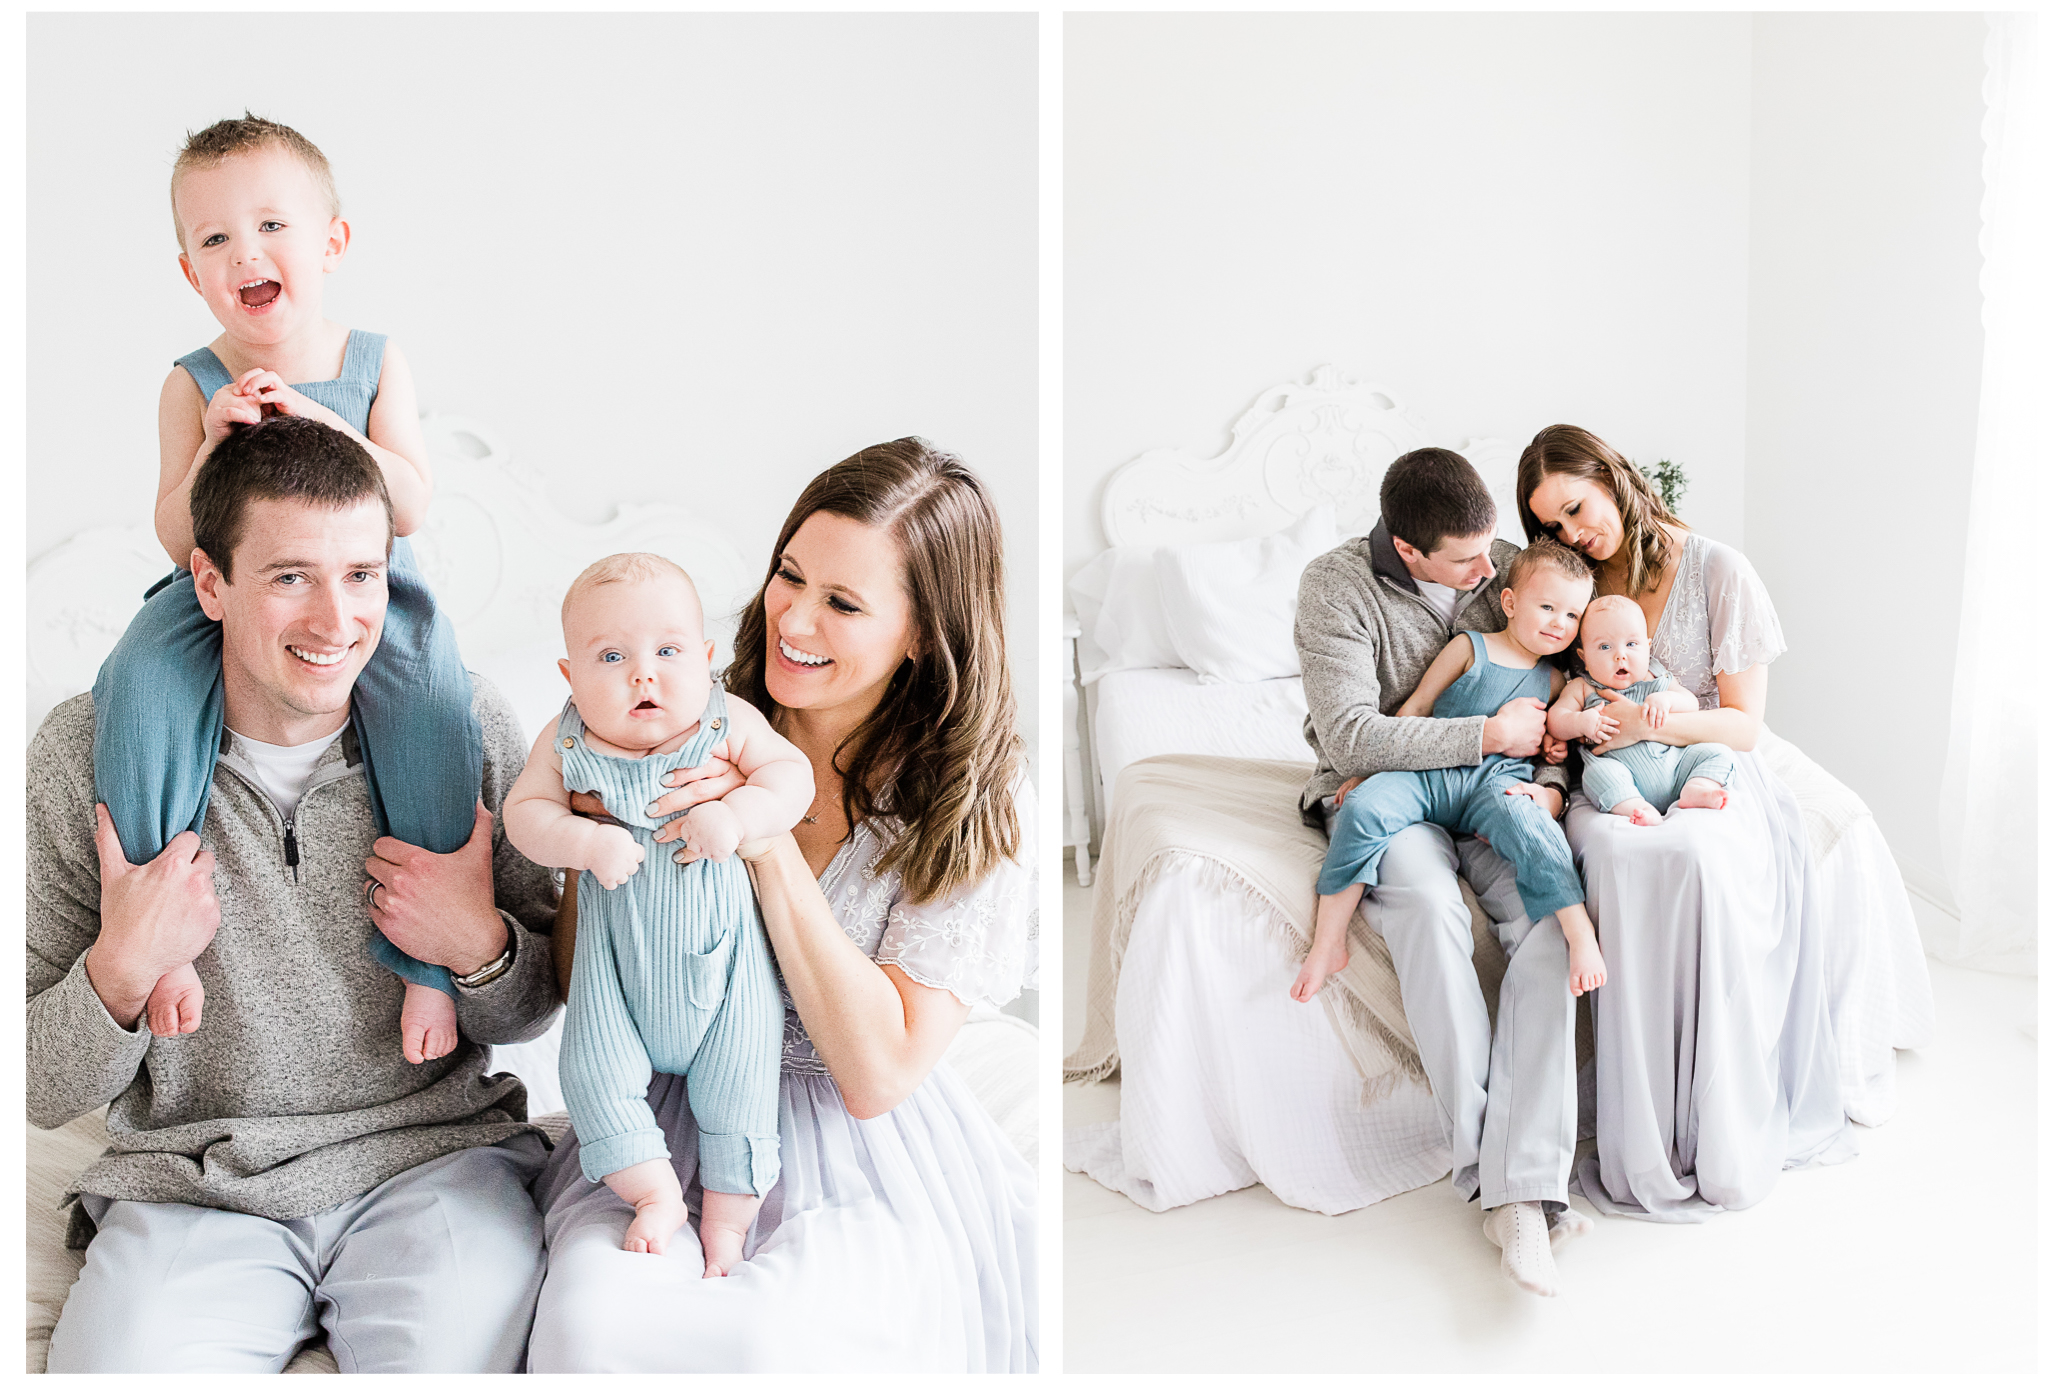 Dayton Baby and Family Photography | Winter Freire Photography | Dayton, Ohio Photographer | Organic Baby Milestone Studio Session Centerville, OH | Timeless Organic Child and Family Portraits